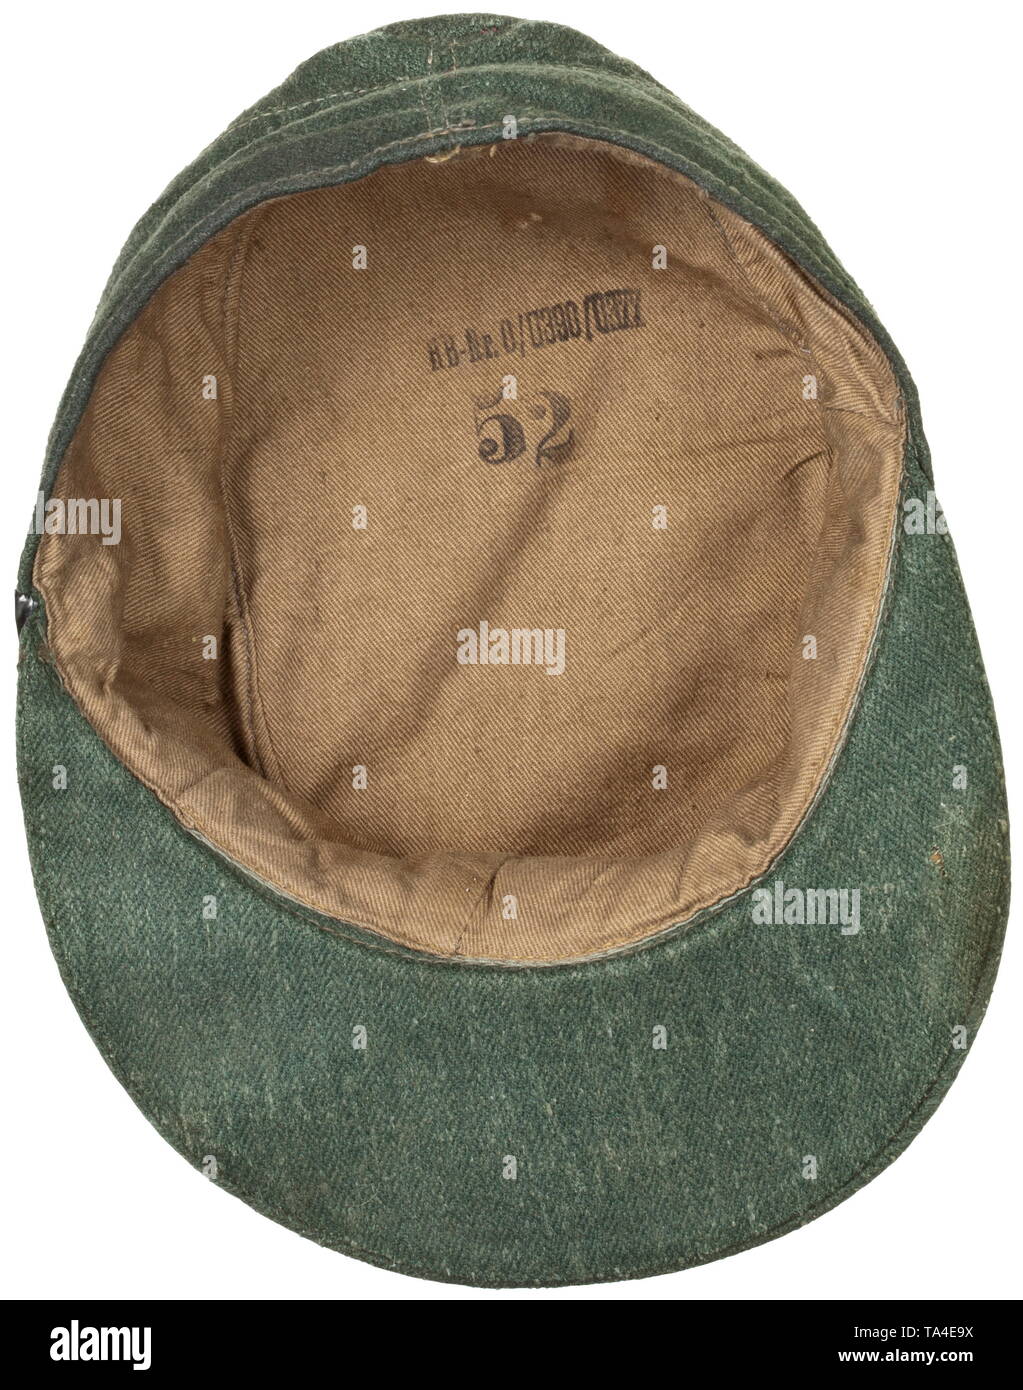 A field cap M 43 for enlisted men/NCOs in the army late depot piece historic, historical, army, armies, armed forces, military, militaria, object, objects, stills, clipping, clippings, cut out, cut-out, cut-outs, 20th century, Editorial-Use-Only Stock Photo